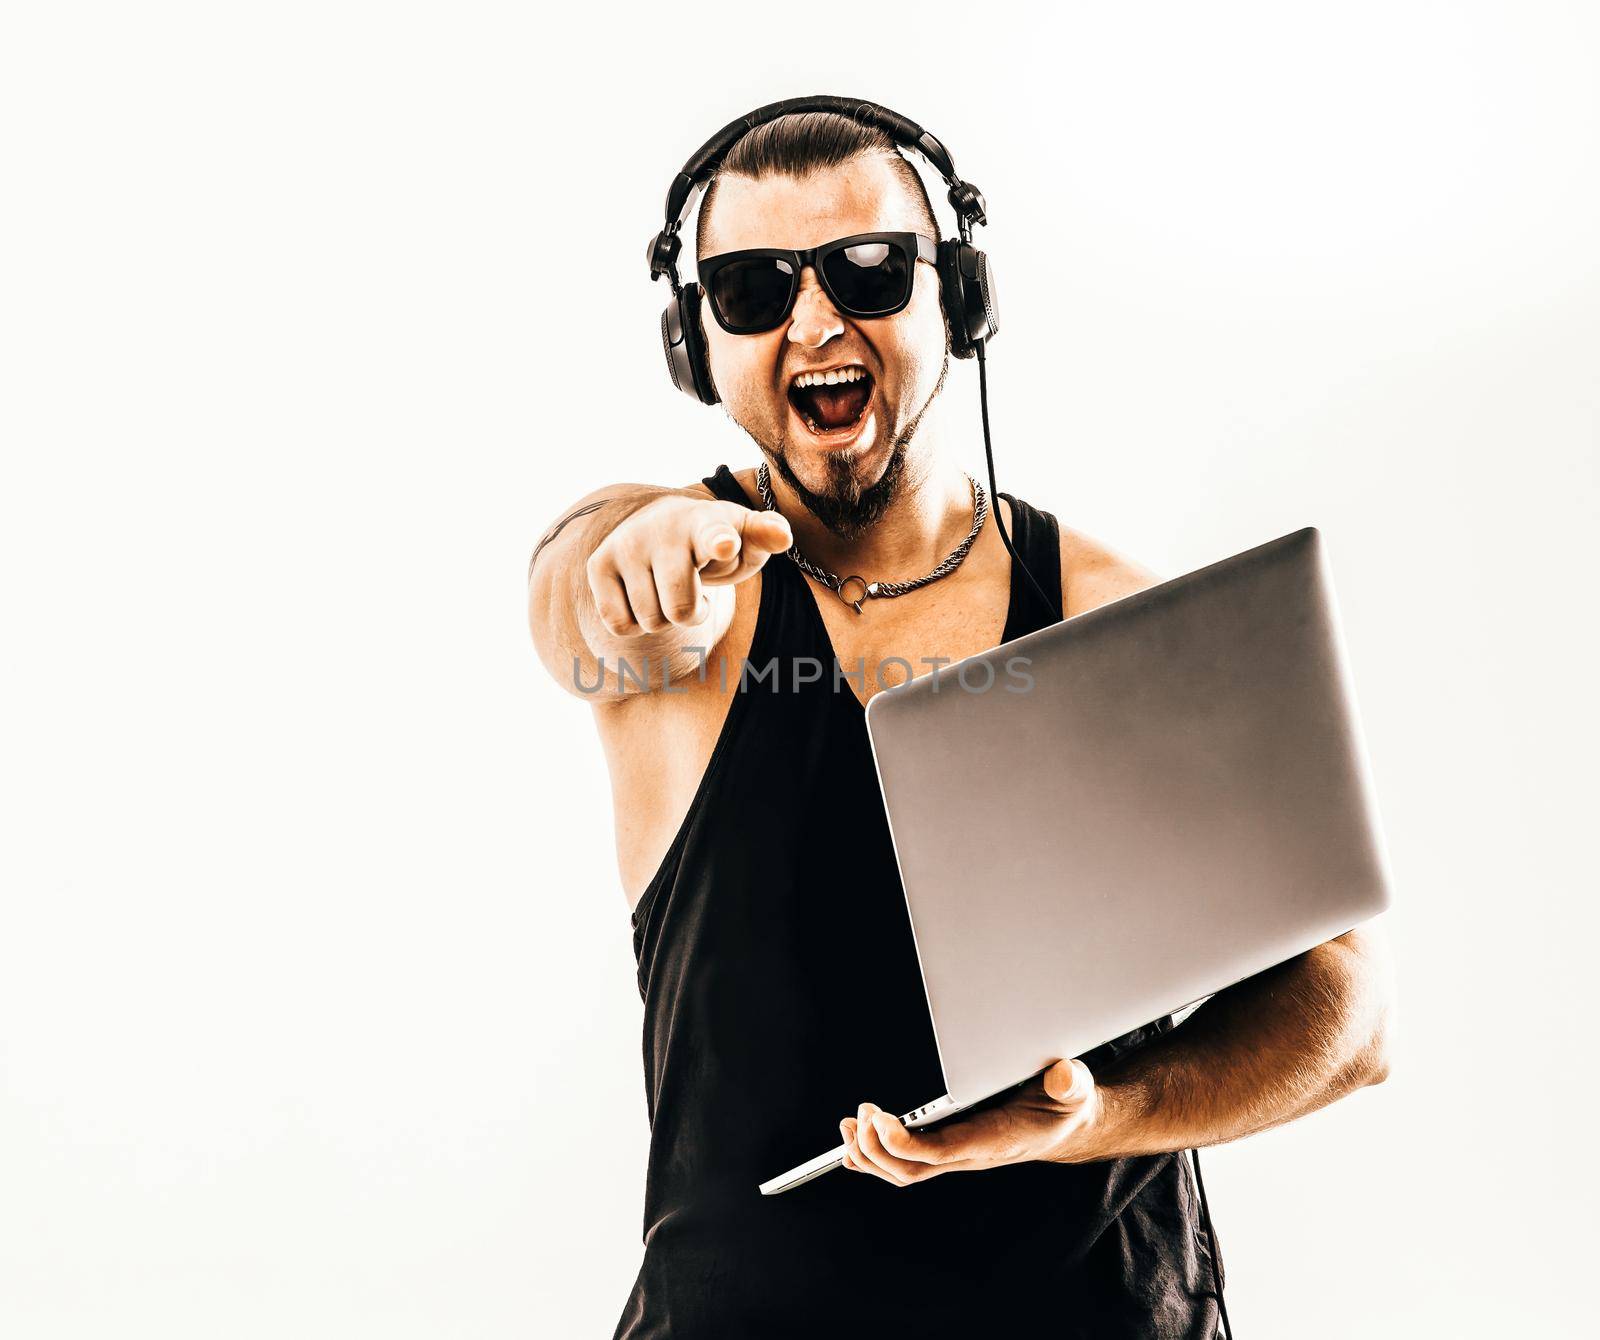 charismatic DJ - rapper in headphones and with a laptop .photo on a white background and has an empty space for your text